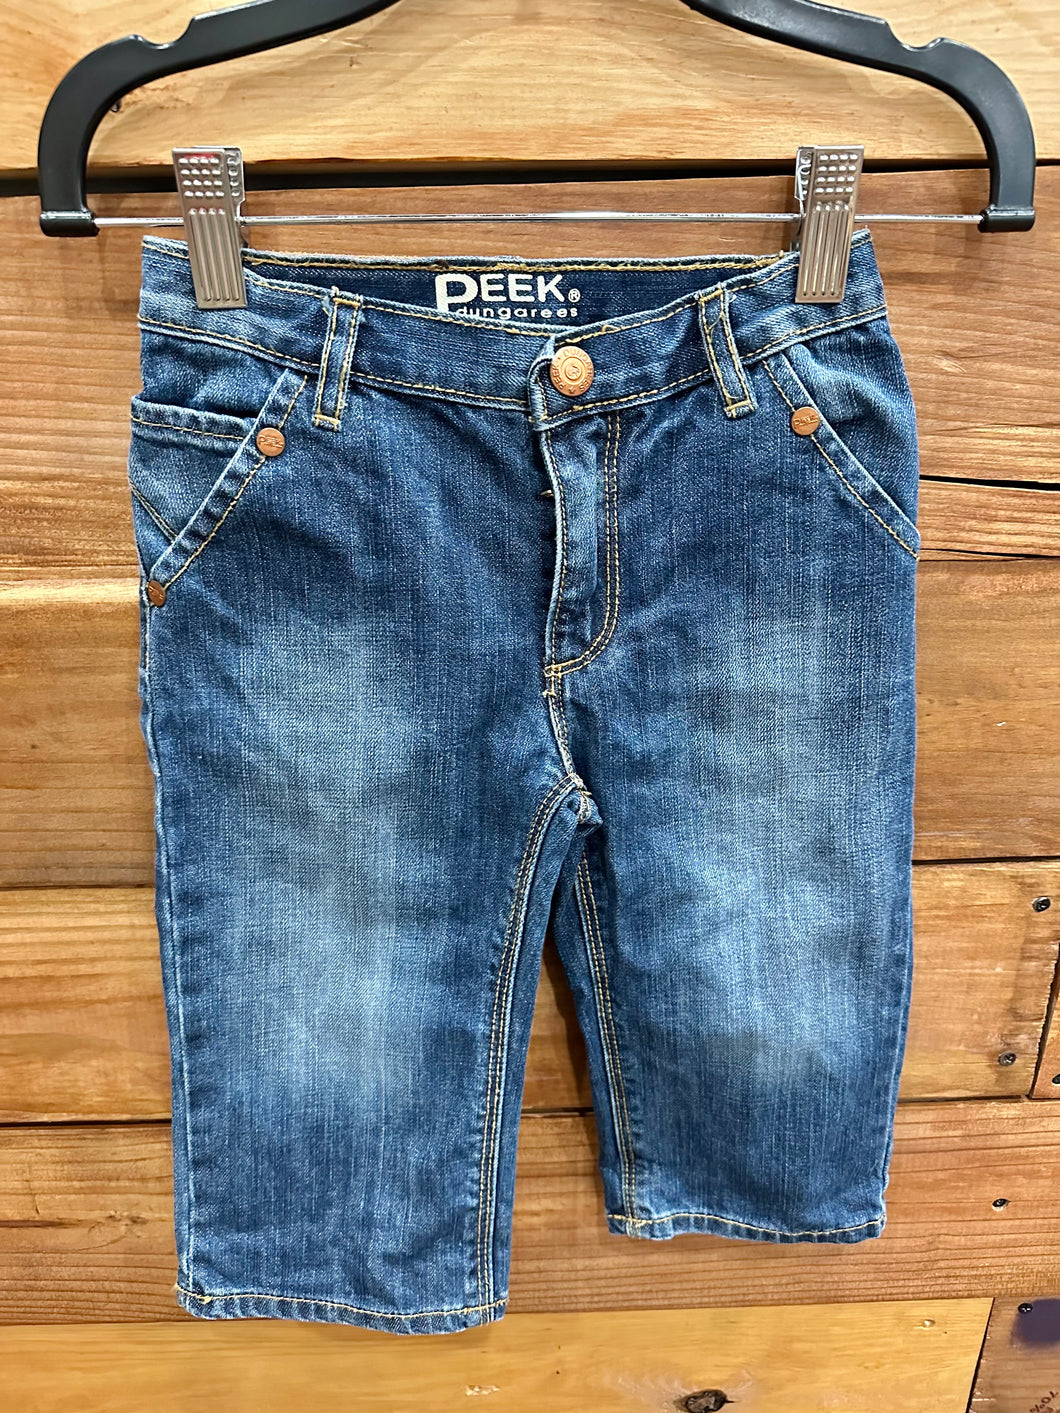 Peek Dungarees Jeans Size 18-24m